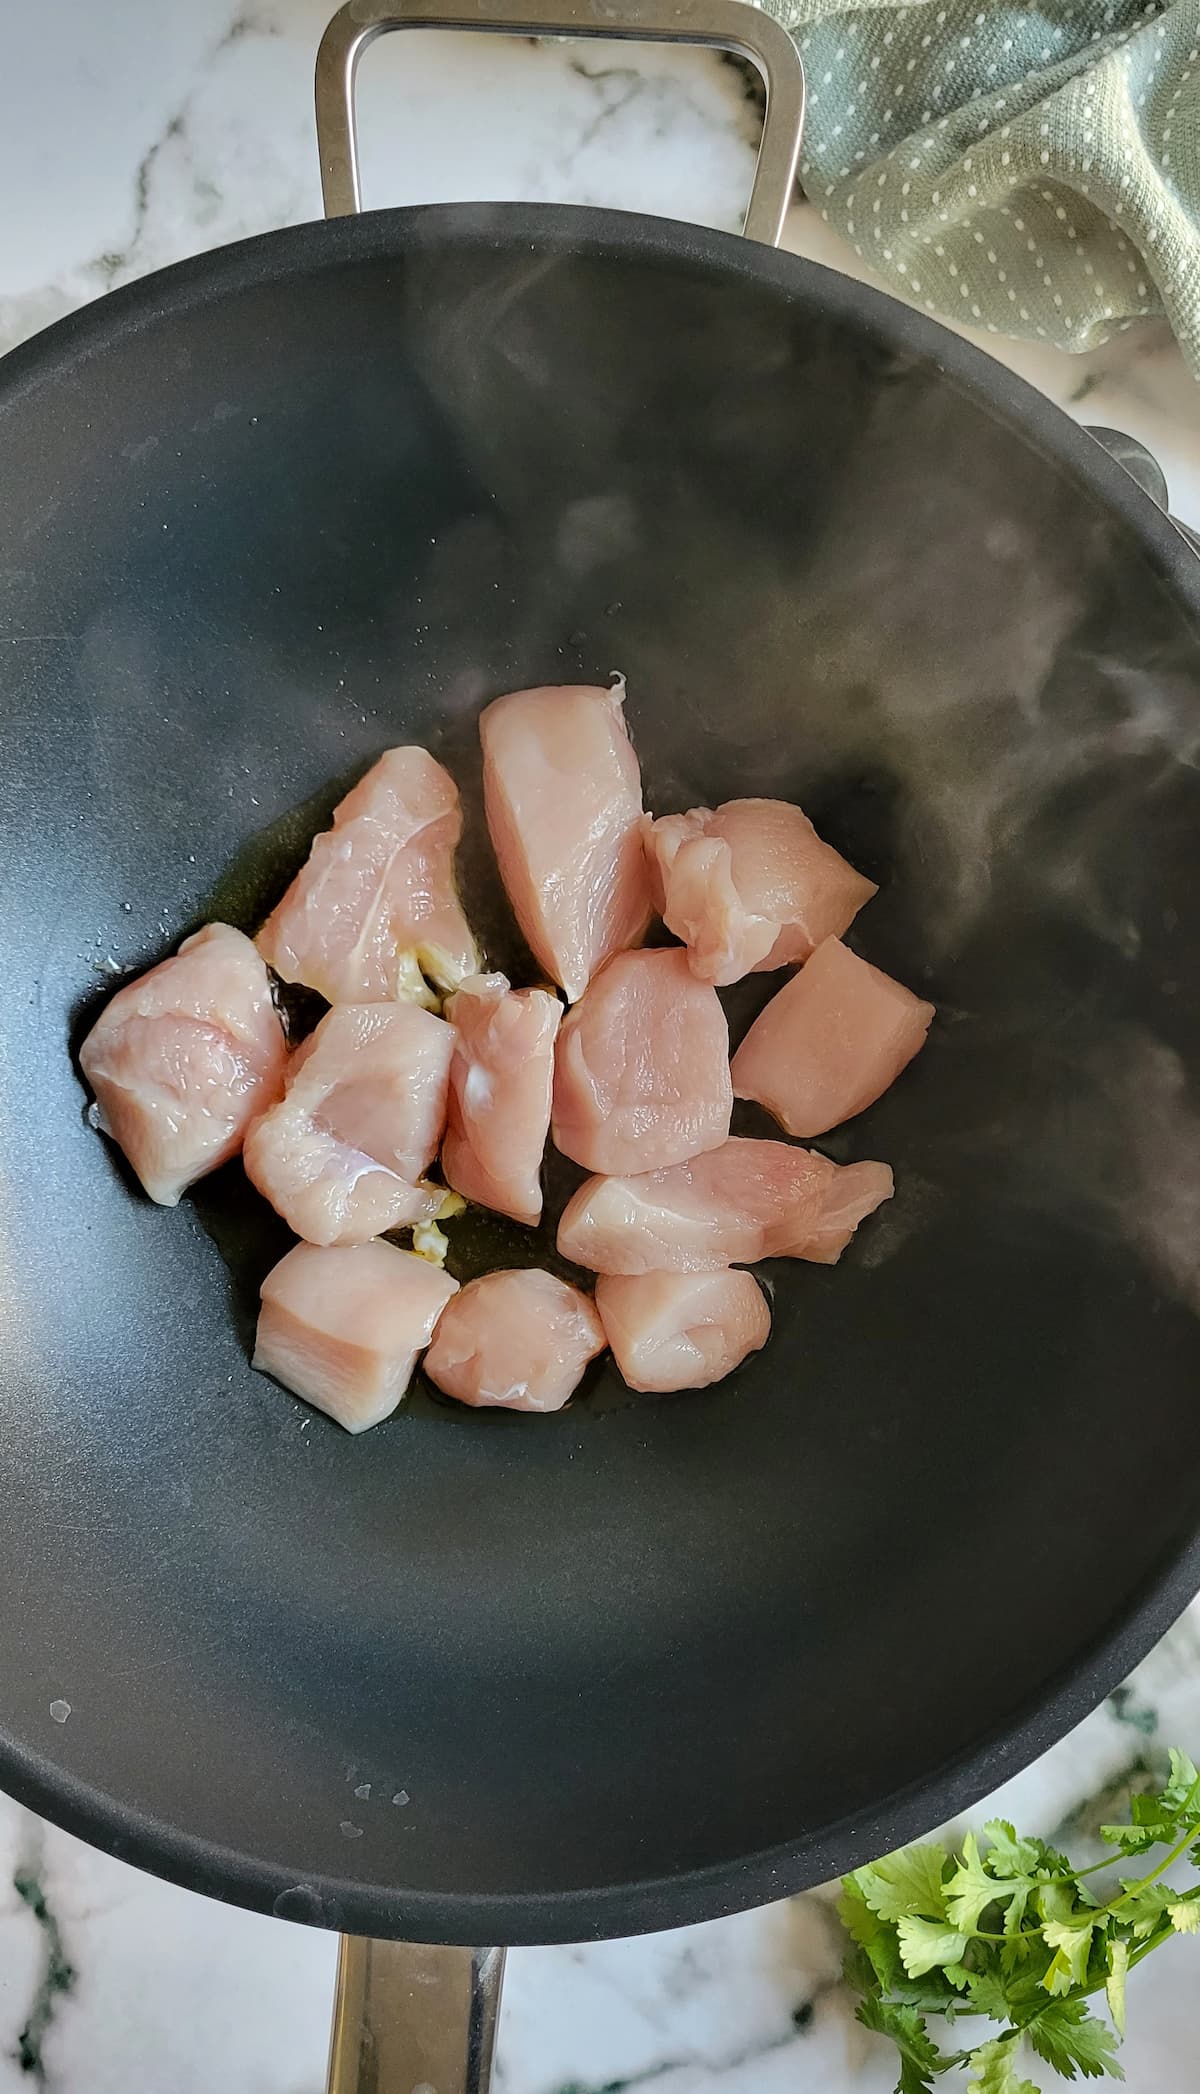 raw cubed chicken cooking in a wok